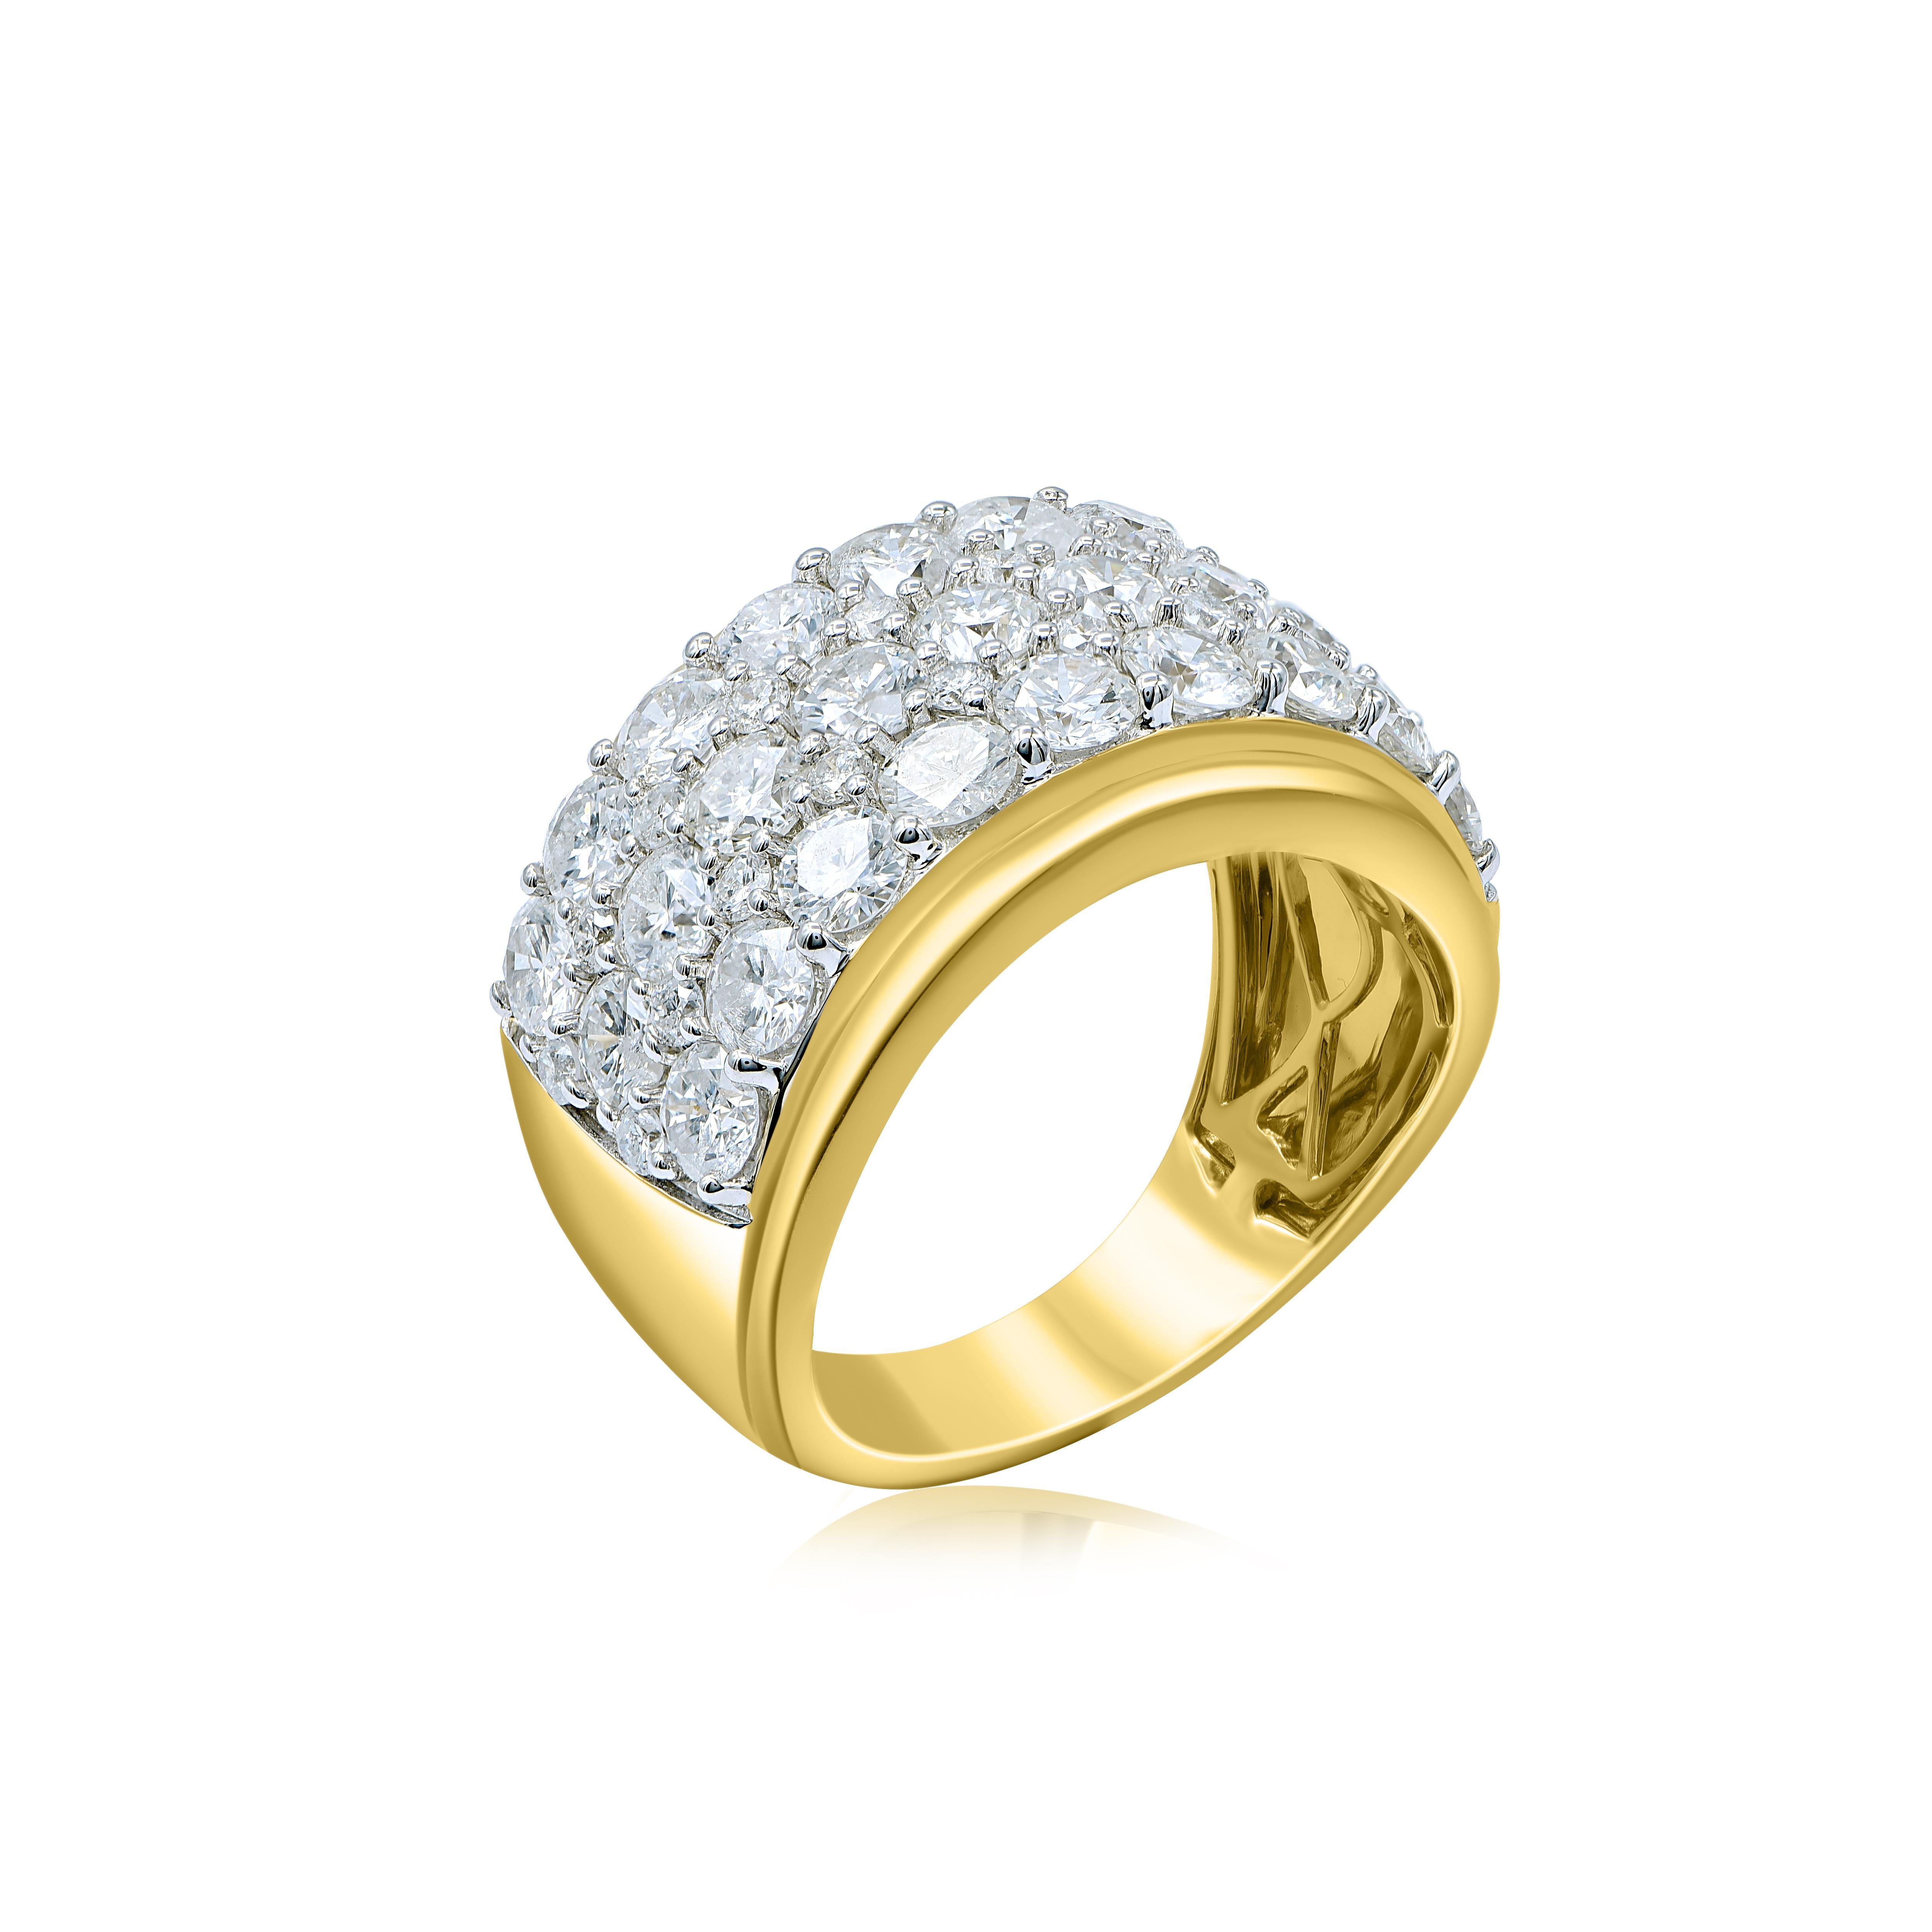 Breath-taking bridal multi row band is embellished with 47 round-cut diamond in prong setting, diamond grading is H-I Color, I3 Clarity. This timeless design made by skillful craftsman in 14 KT yellow gold. Comes along with certificate of